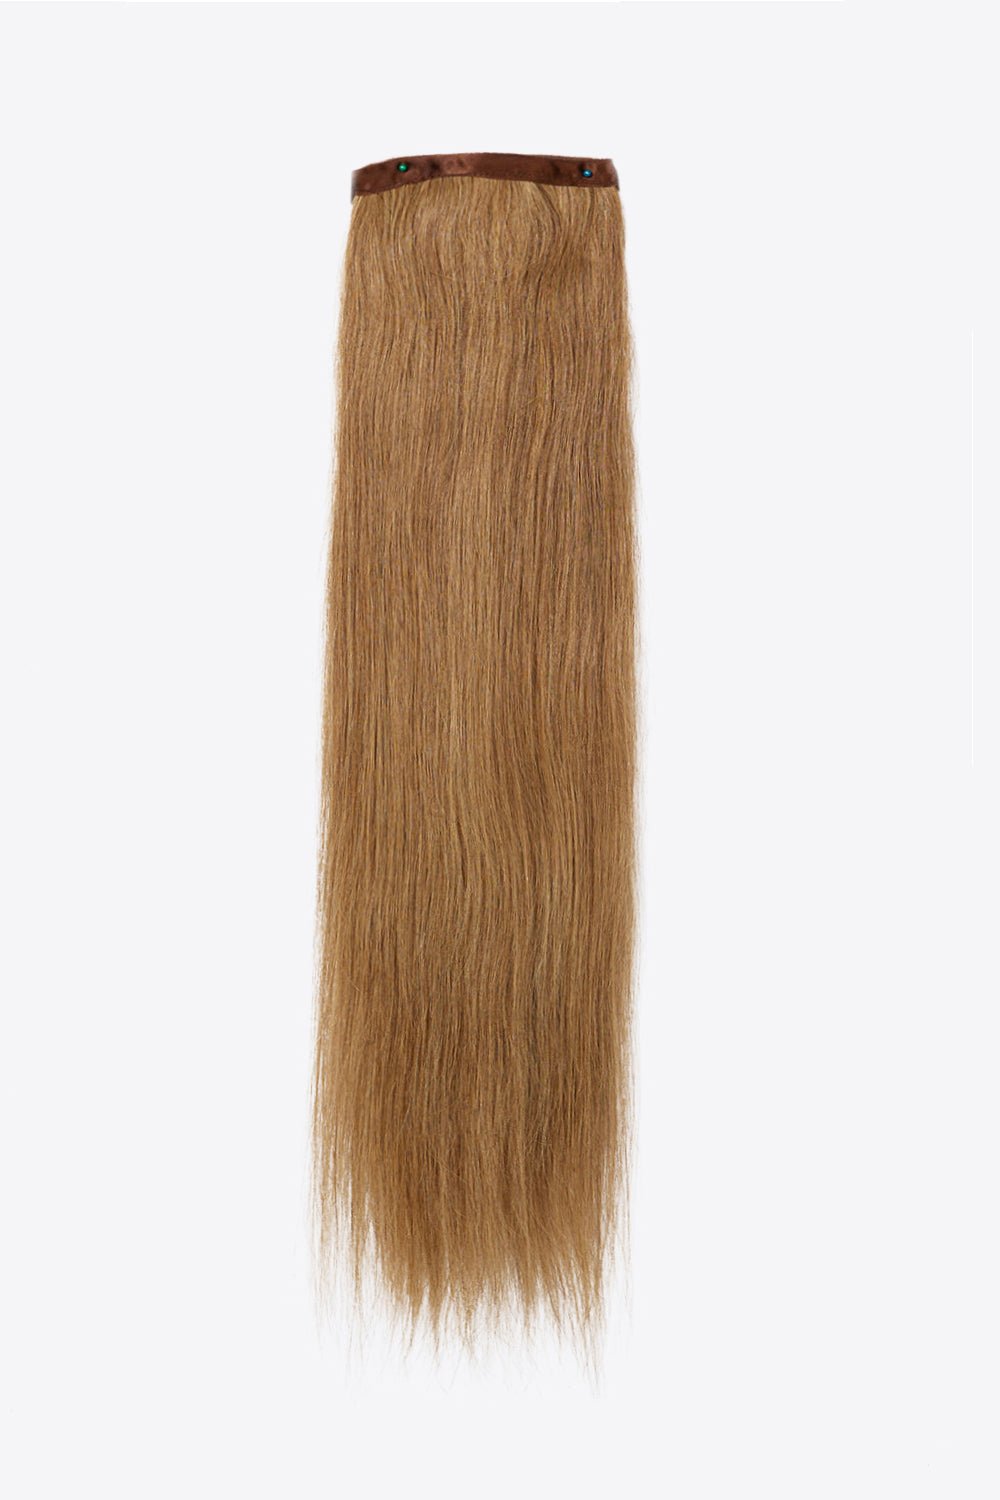 24" 130g Ponytail Long Lasting Human Hair - TJ Outlet